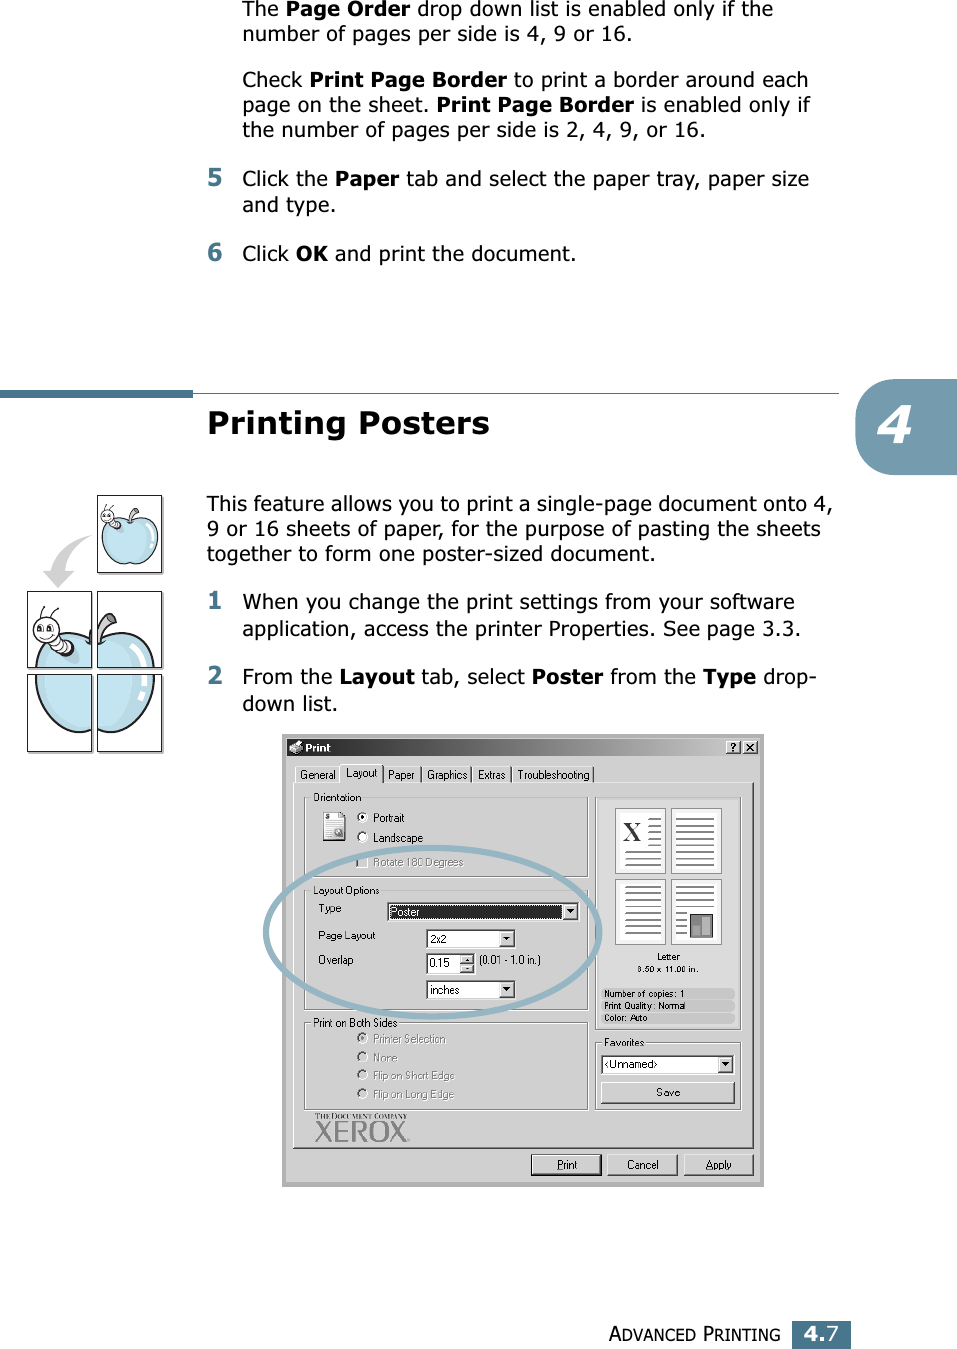 ADVANCED PRINTING4.74The Page Order drop down list is enabled only if the number of pages per side is 4, 9 or 16.Check Print Page Border to print a border around each page on the sheet. Print Page Border is enabled only if the number of pages per side is 2, 4, 9, or 16.5Click the Paper tab and select the paper tray, paper size and type.6Click OK and print the document. Printing PostersThis feature allows you to print a single-page document onto 4, 9 or 16 sheets of paper, for the purpose of pasting the sheets together to form one poster-sized document.1When you change the print settings from your software application, access the printer Properties. See page 3.3.2From the Layout tab, select Poster from the Type drop-down list. 